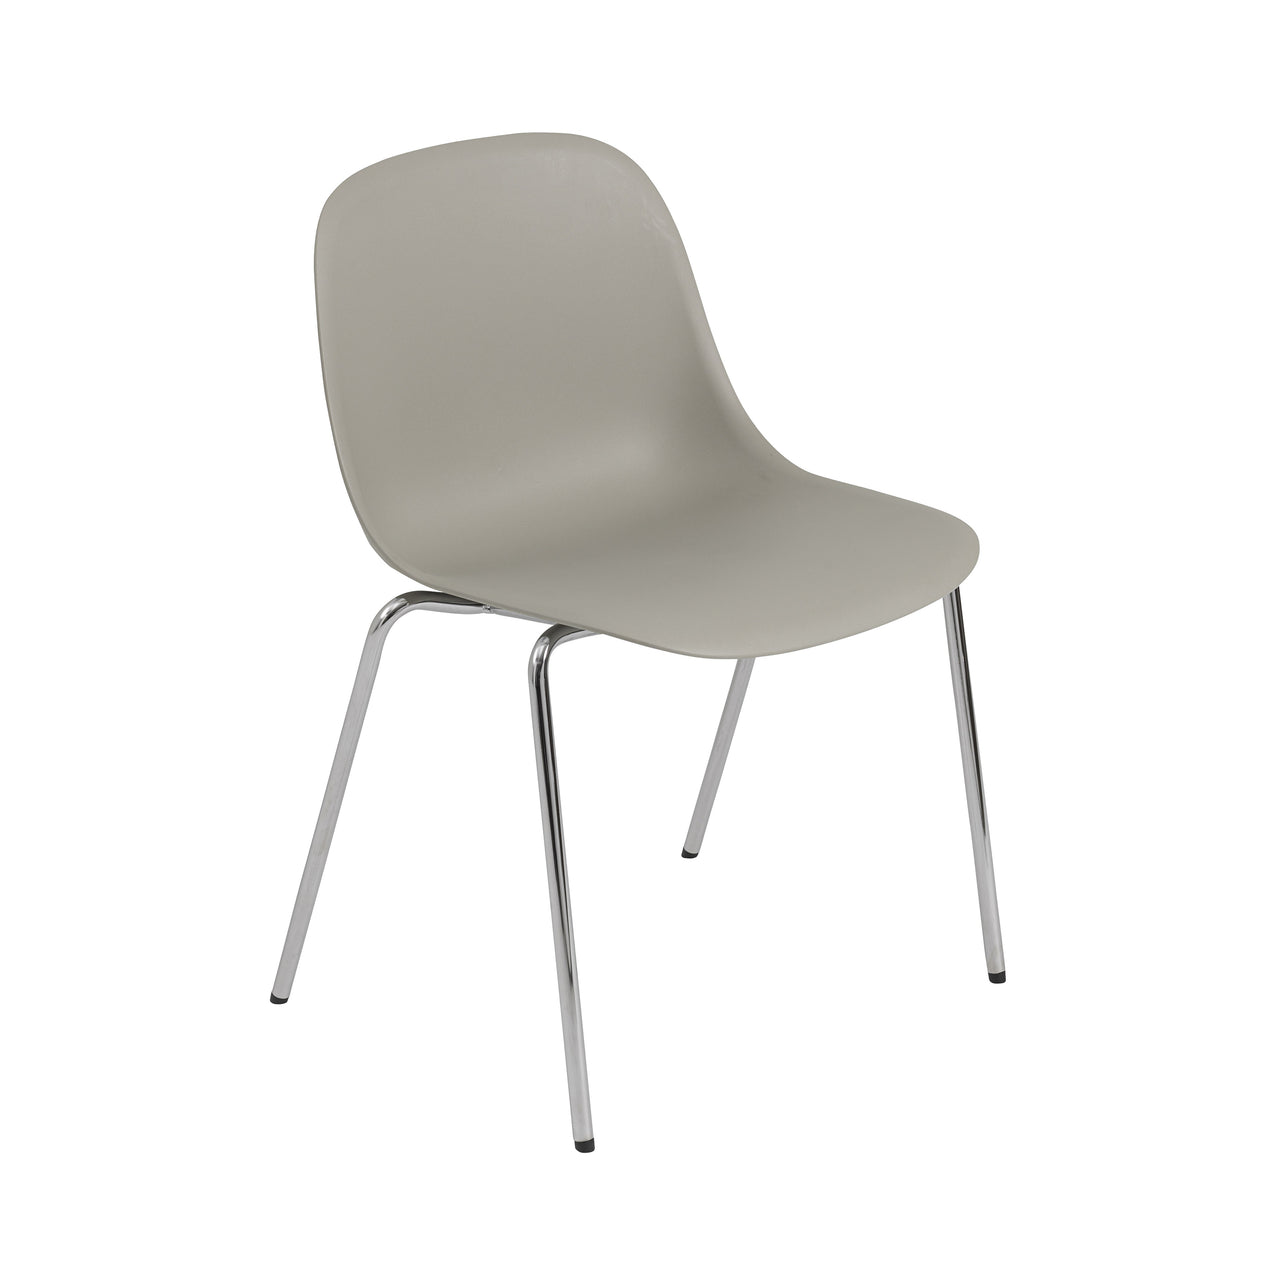 Fiber Side Chair: A-Base with Glides + Grey